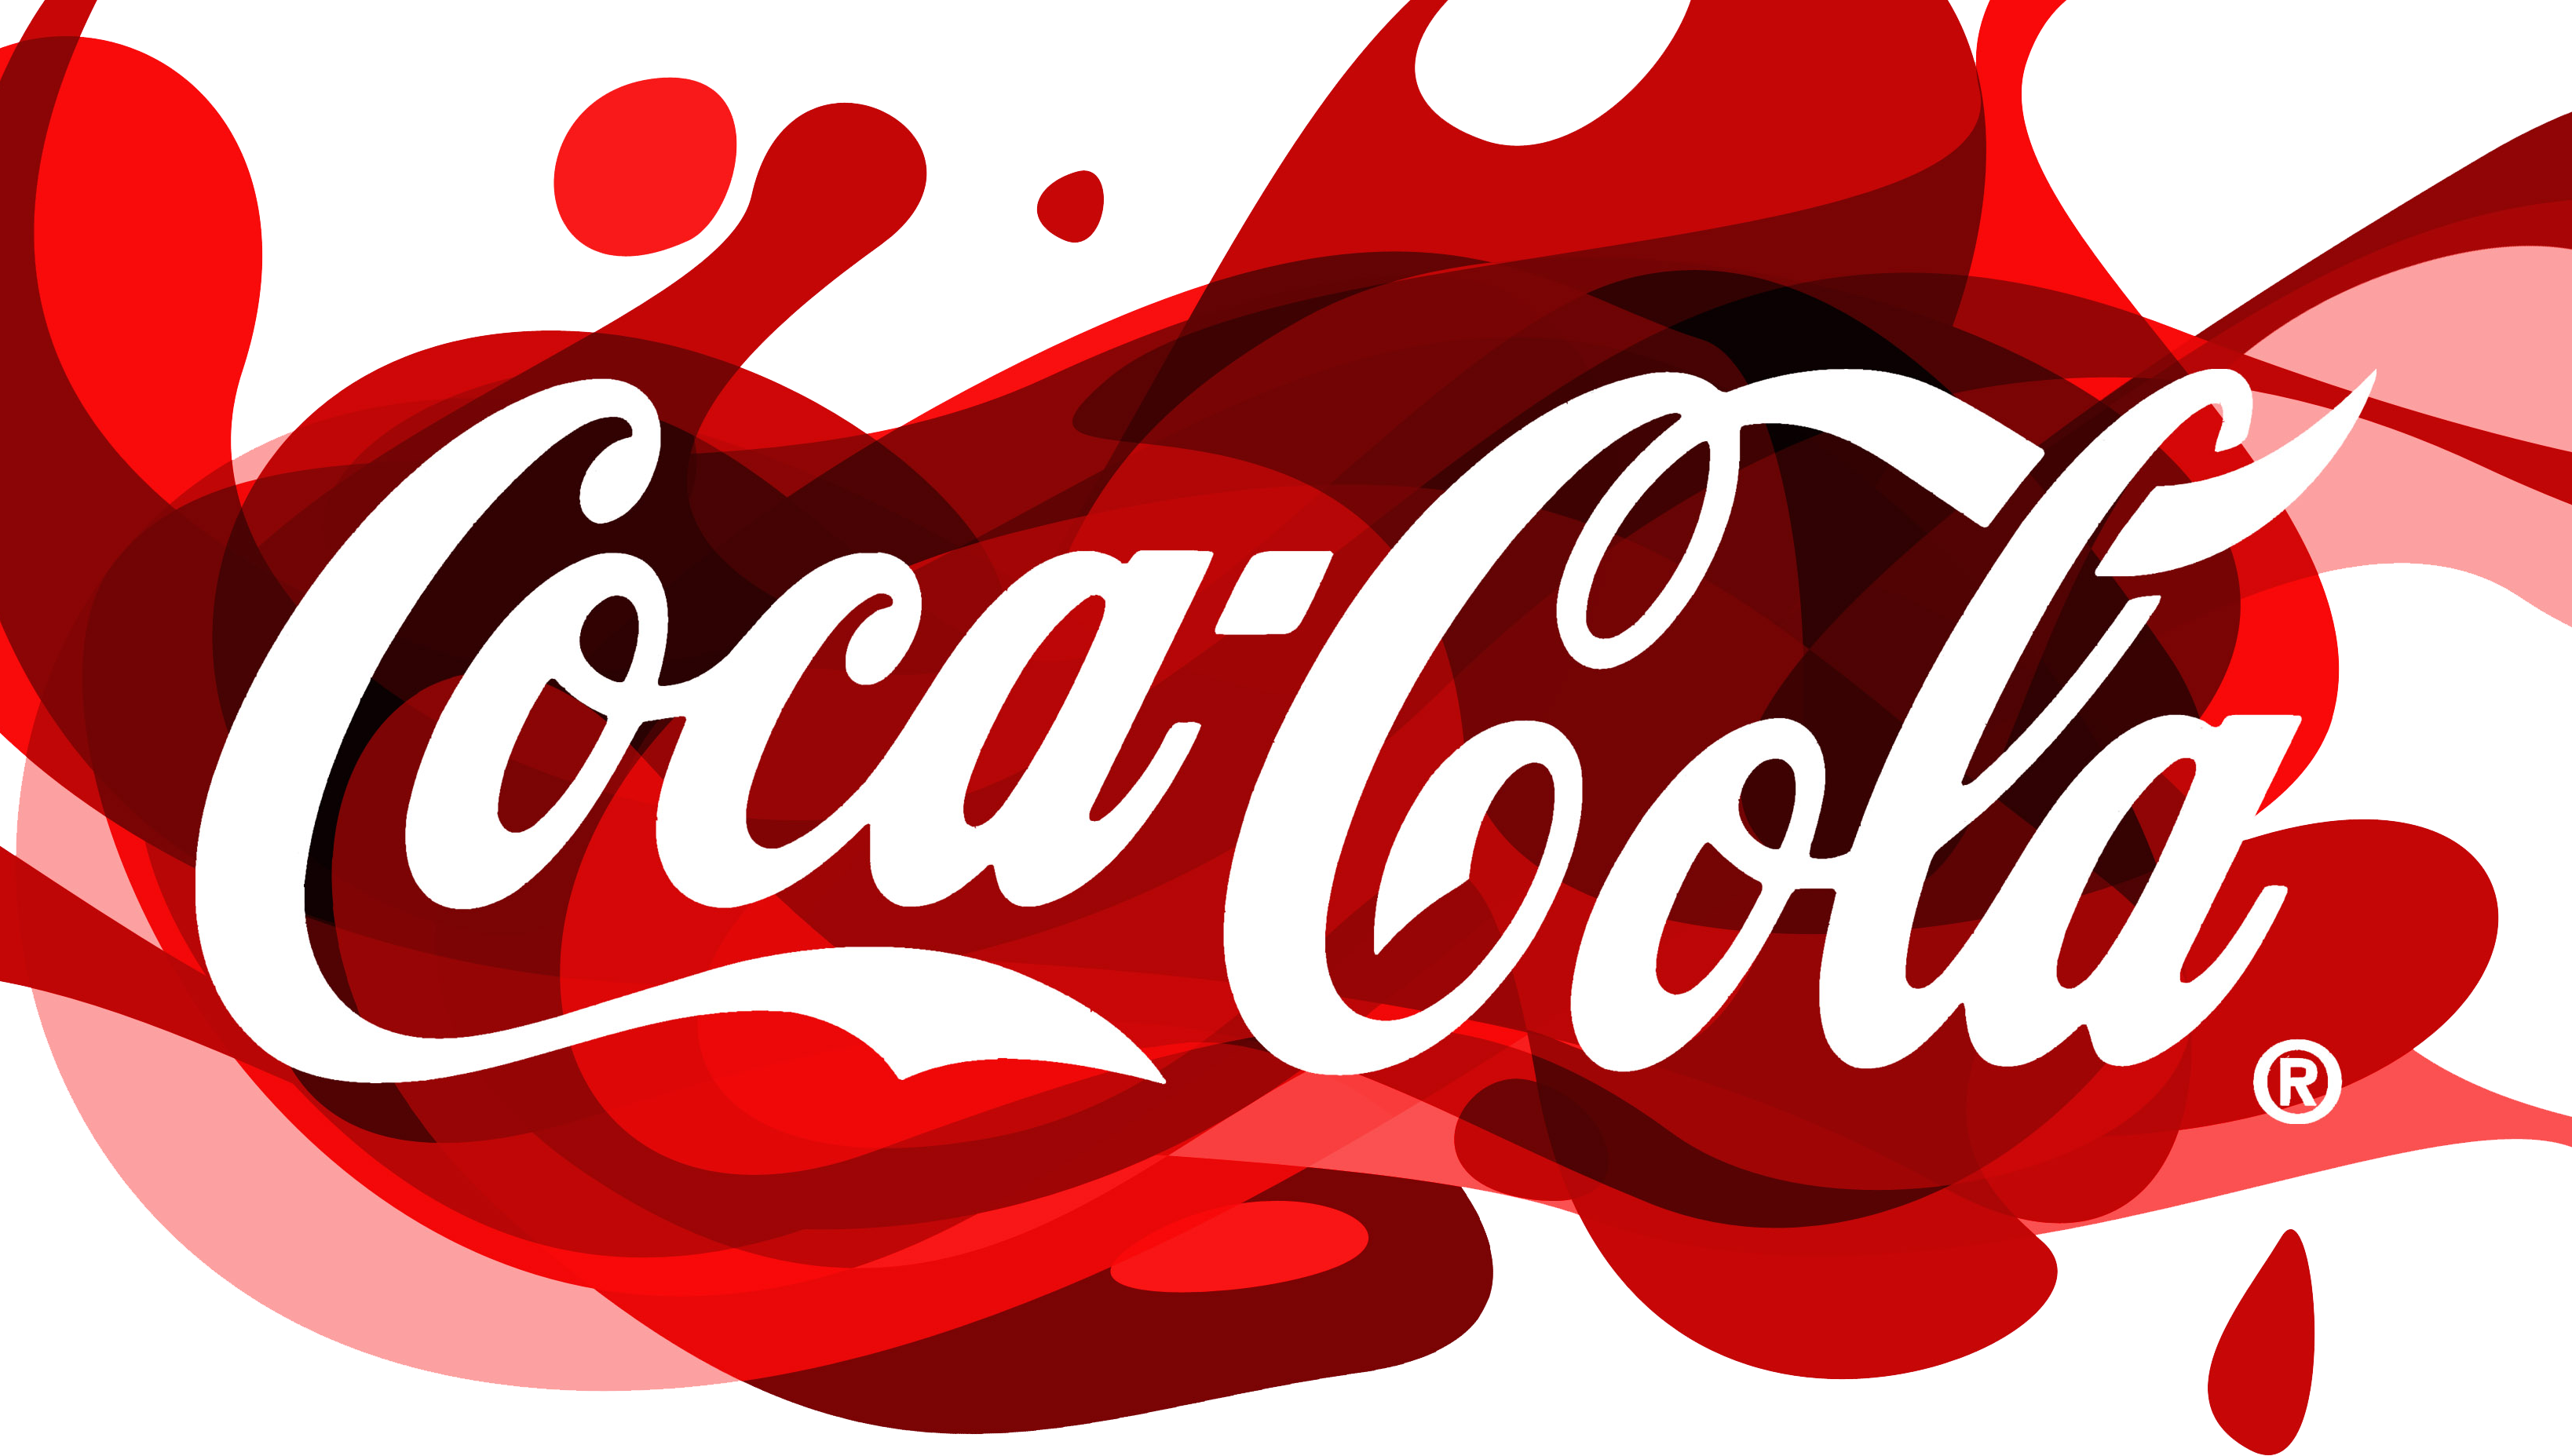 Coca cola text logo png #41683 - Free Icons and PNG Backgrounds